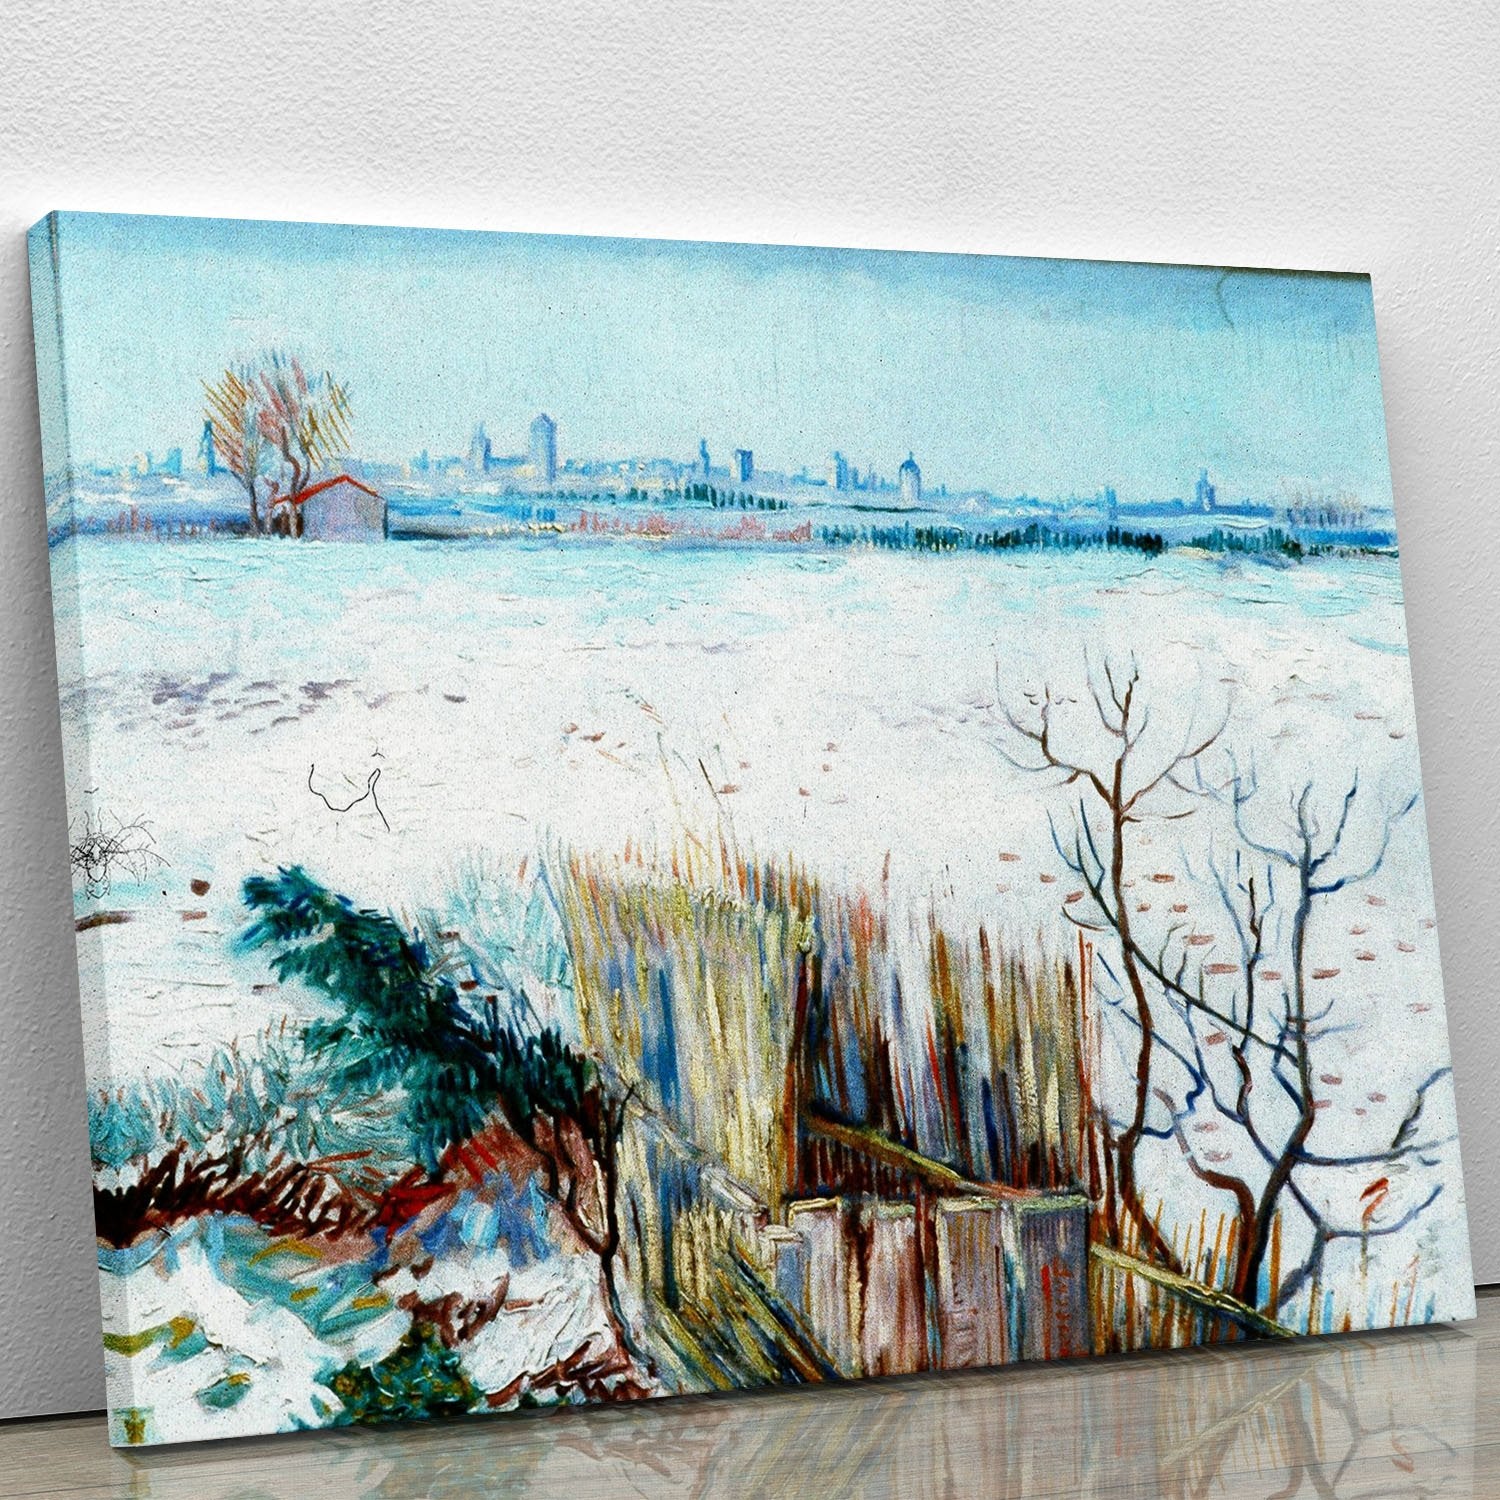 Snowy Landscape with Arles in the Background by Van Gogh Canvas Print or Poster